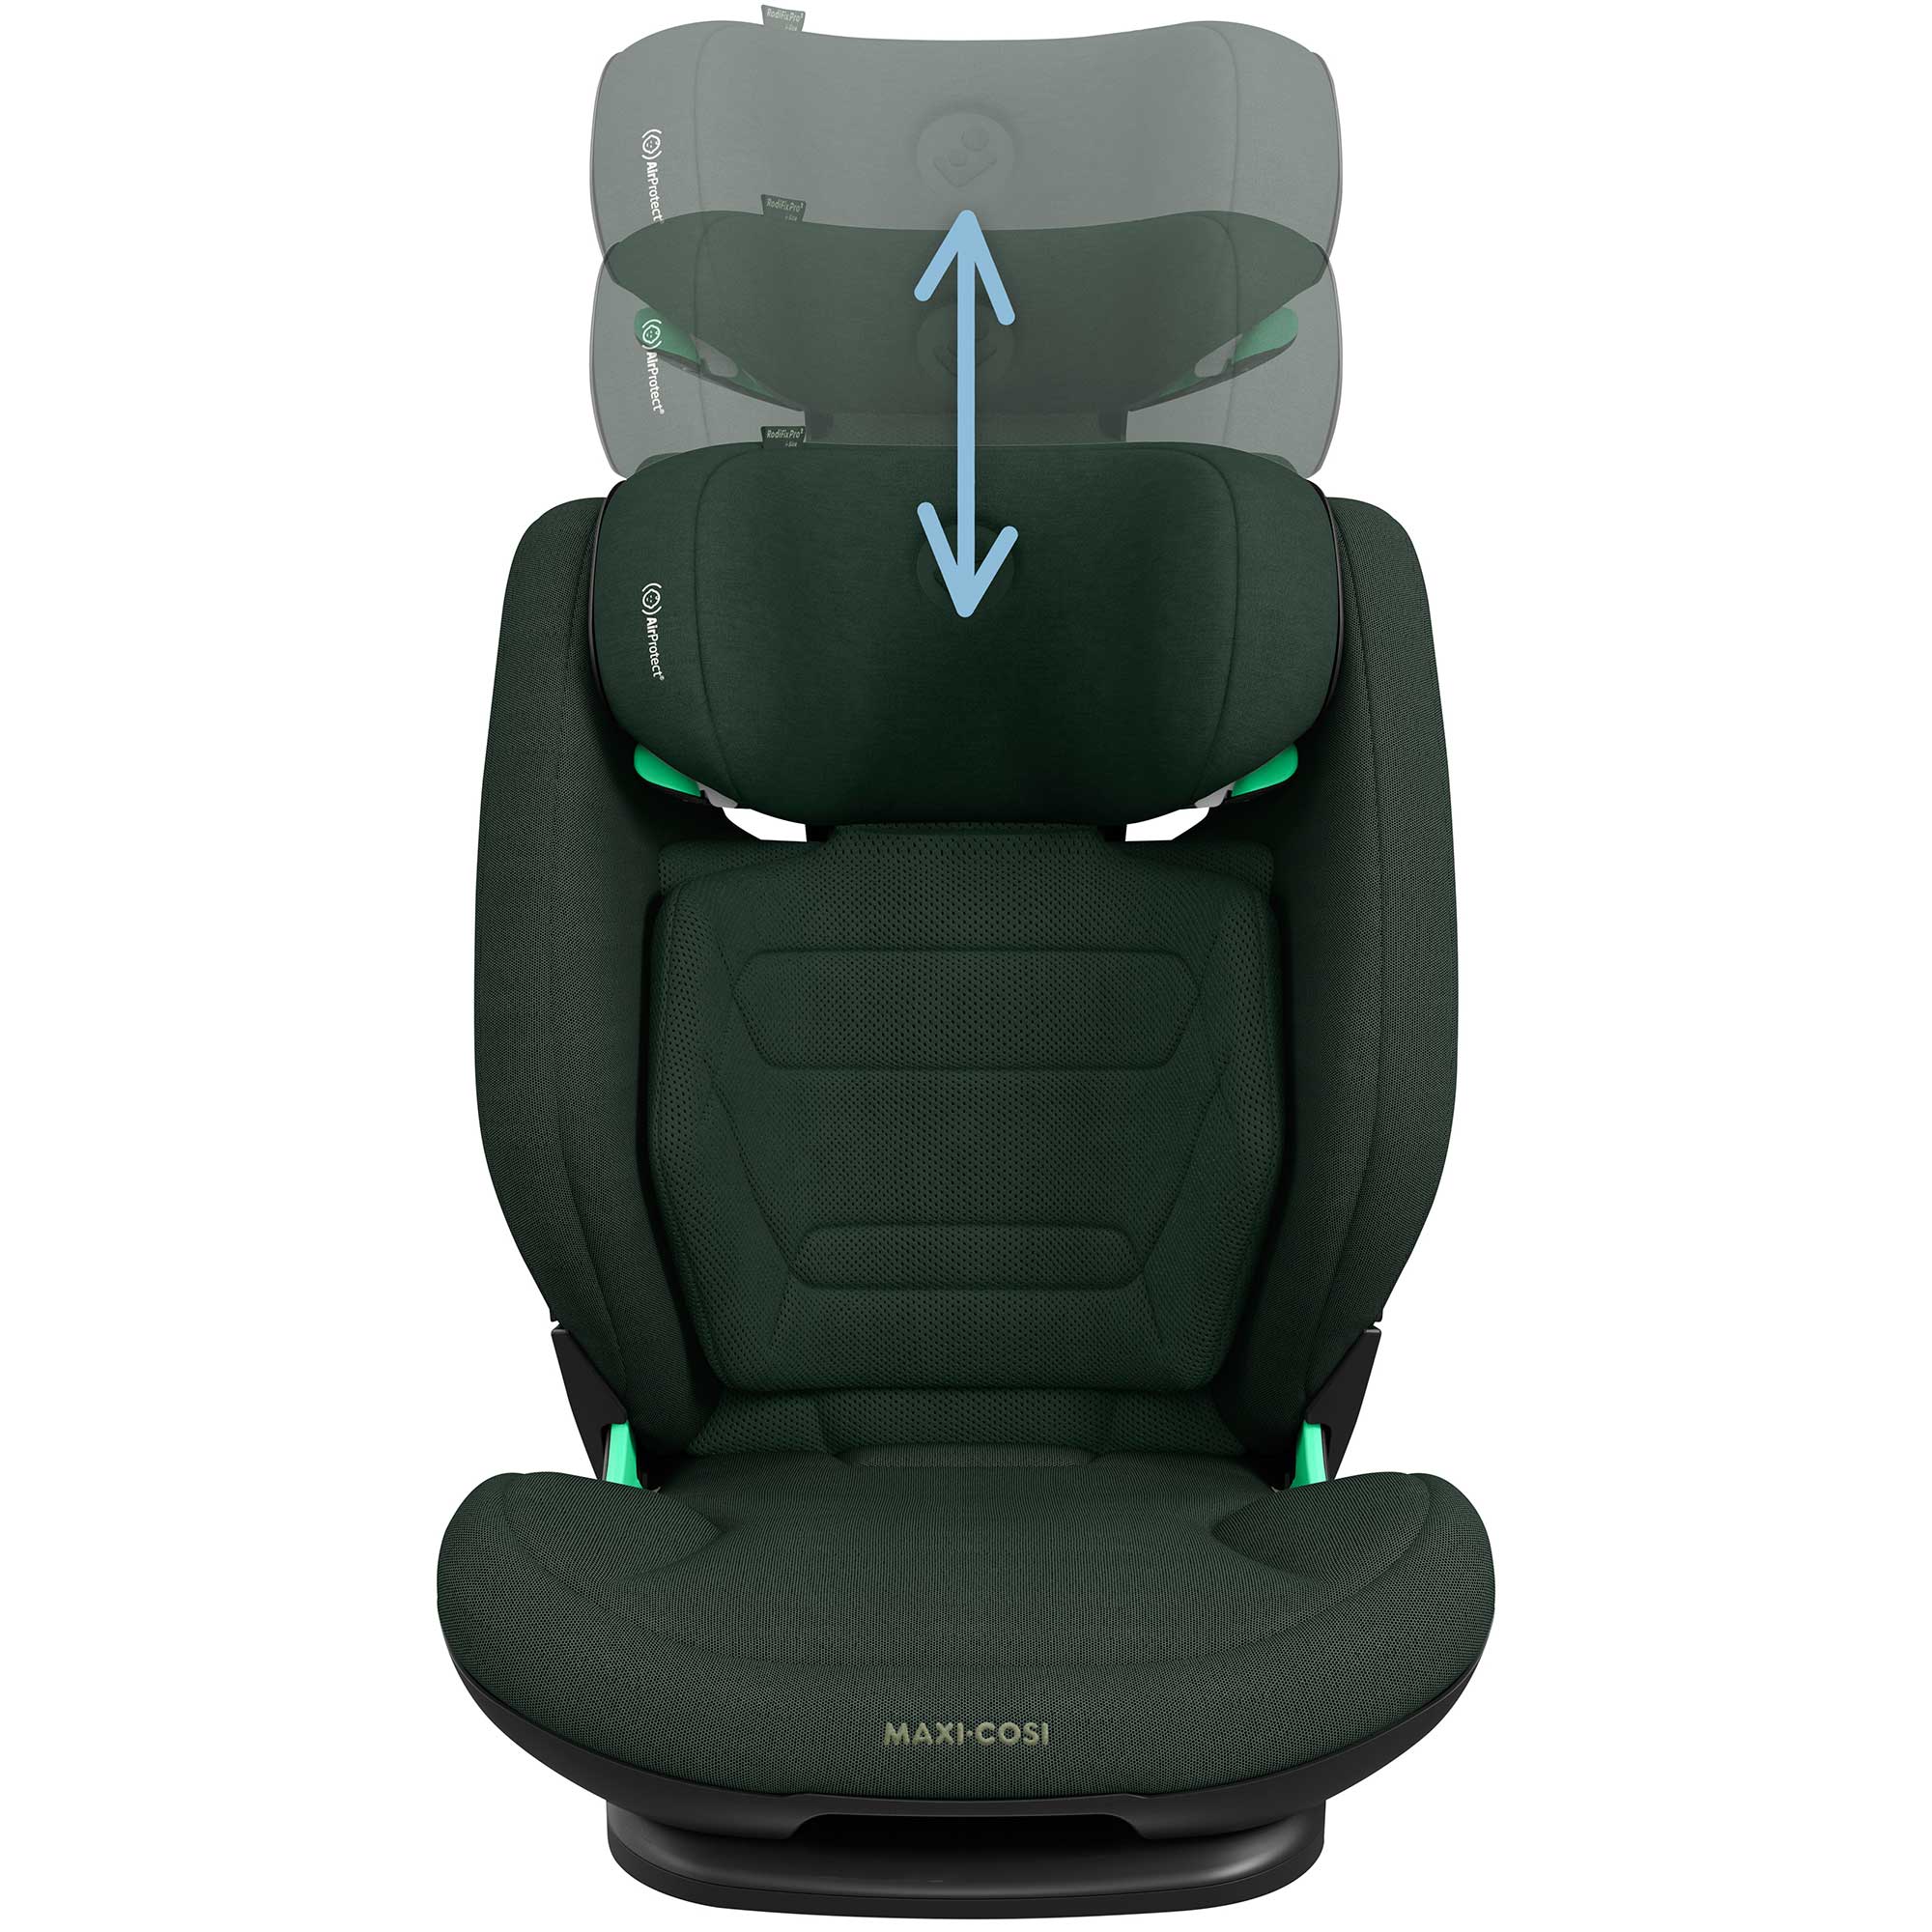 Maxi-Cosi Rodifix Pro 2 i-size Booster Seat in Authentic Green Highback Booster Seats 8800490110 8712930186748